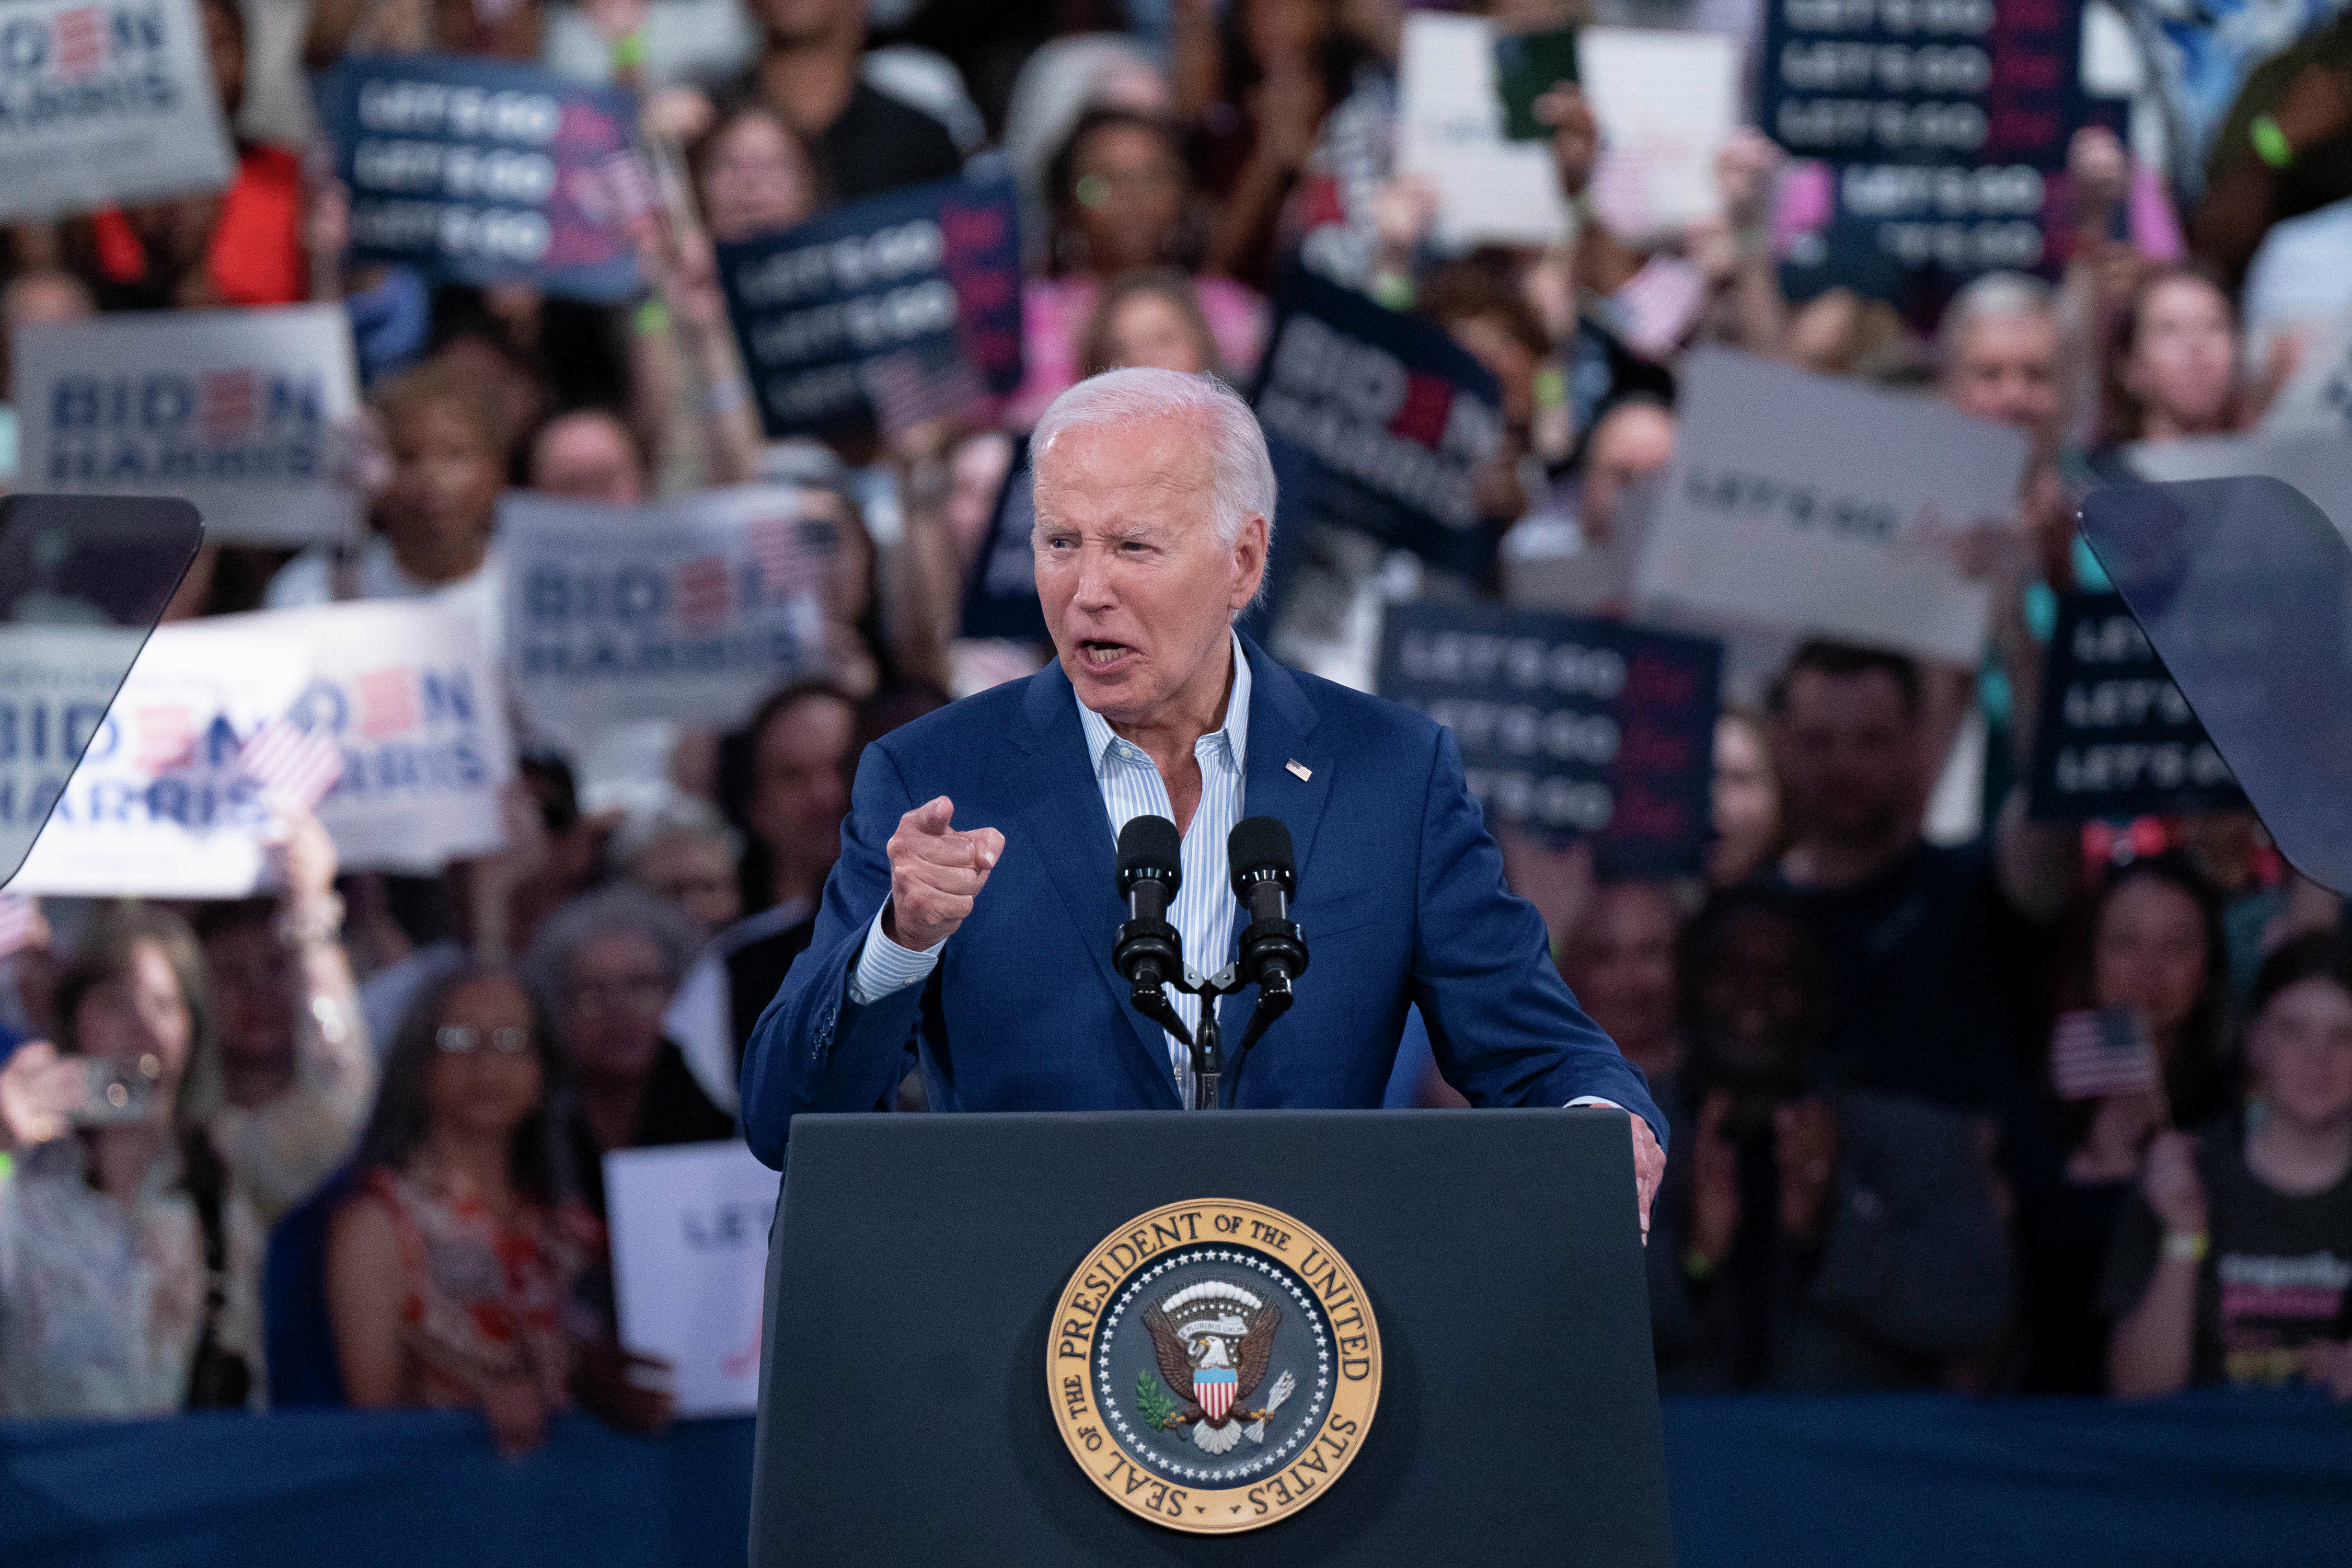 NEWSLINE: President Biden's family urging him to stay in race following debate fallout